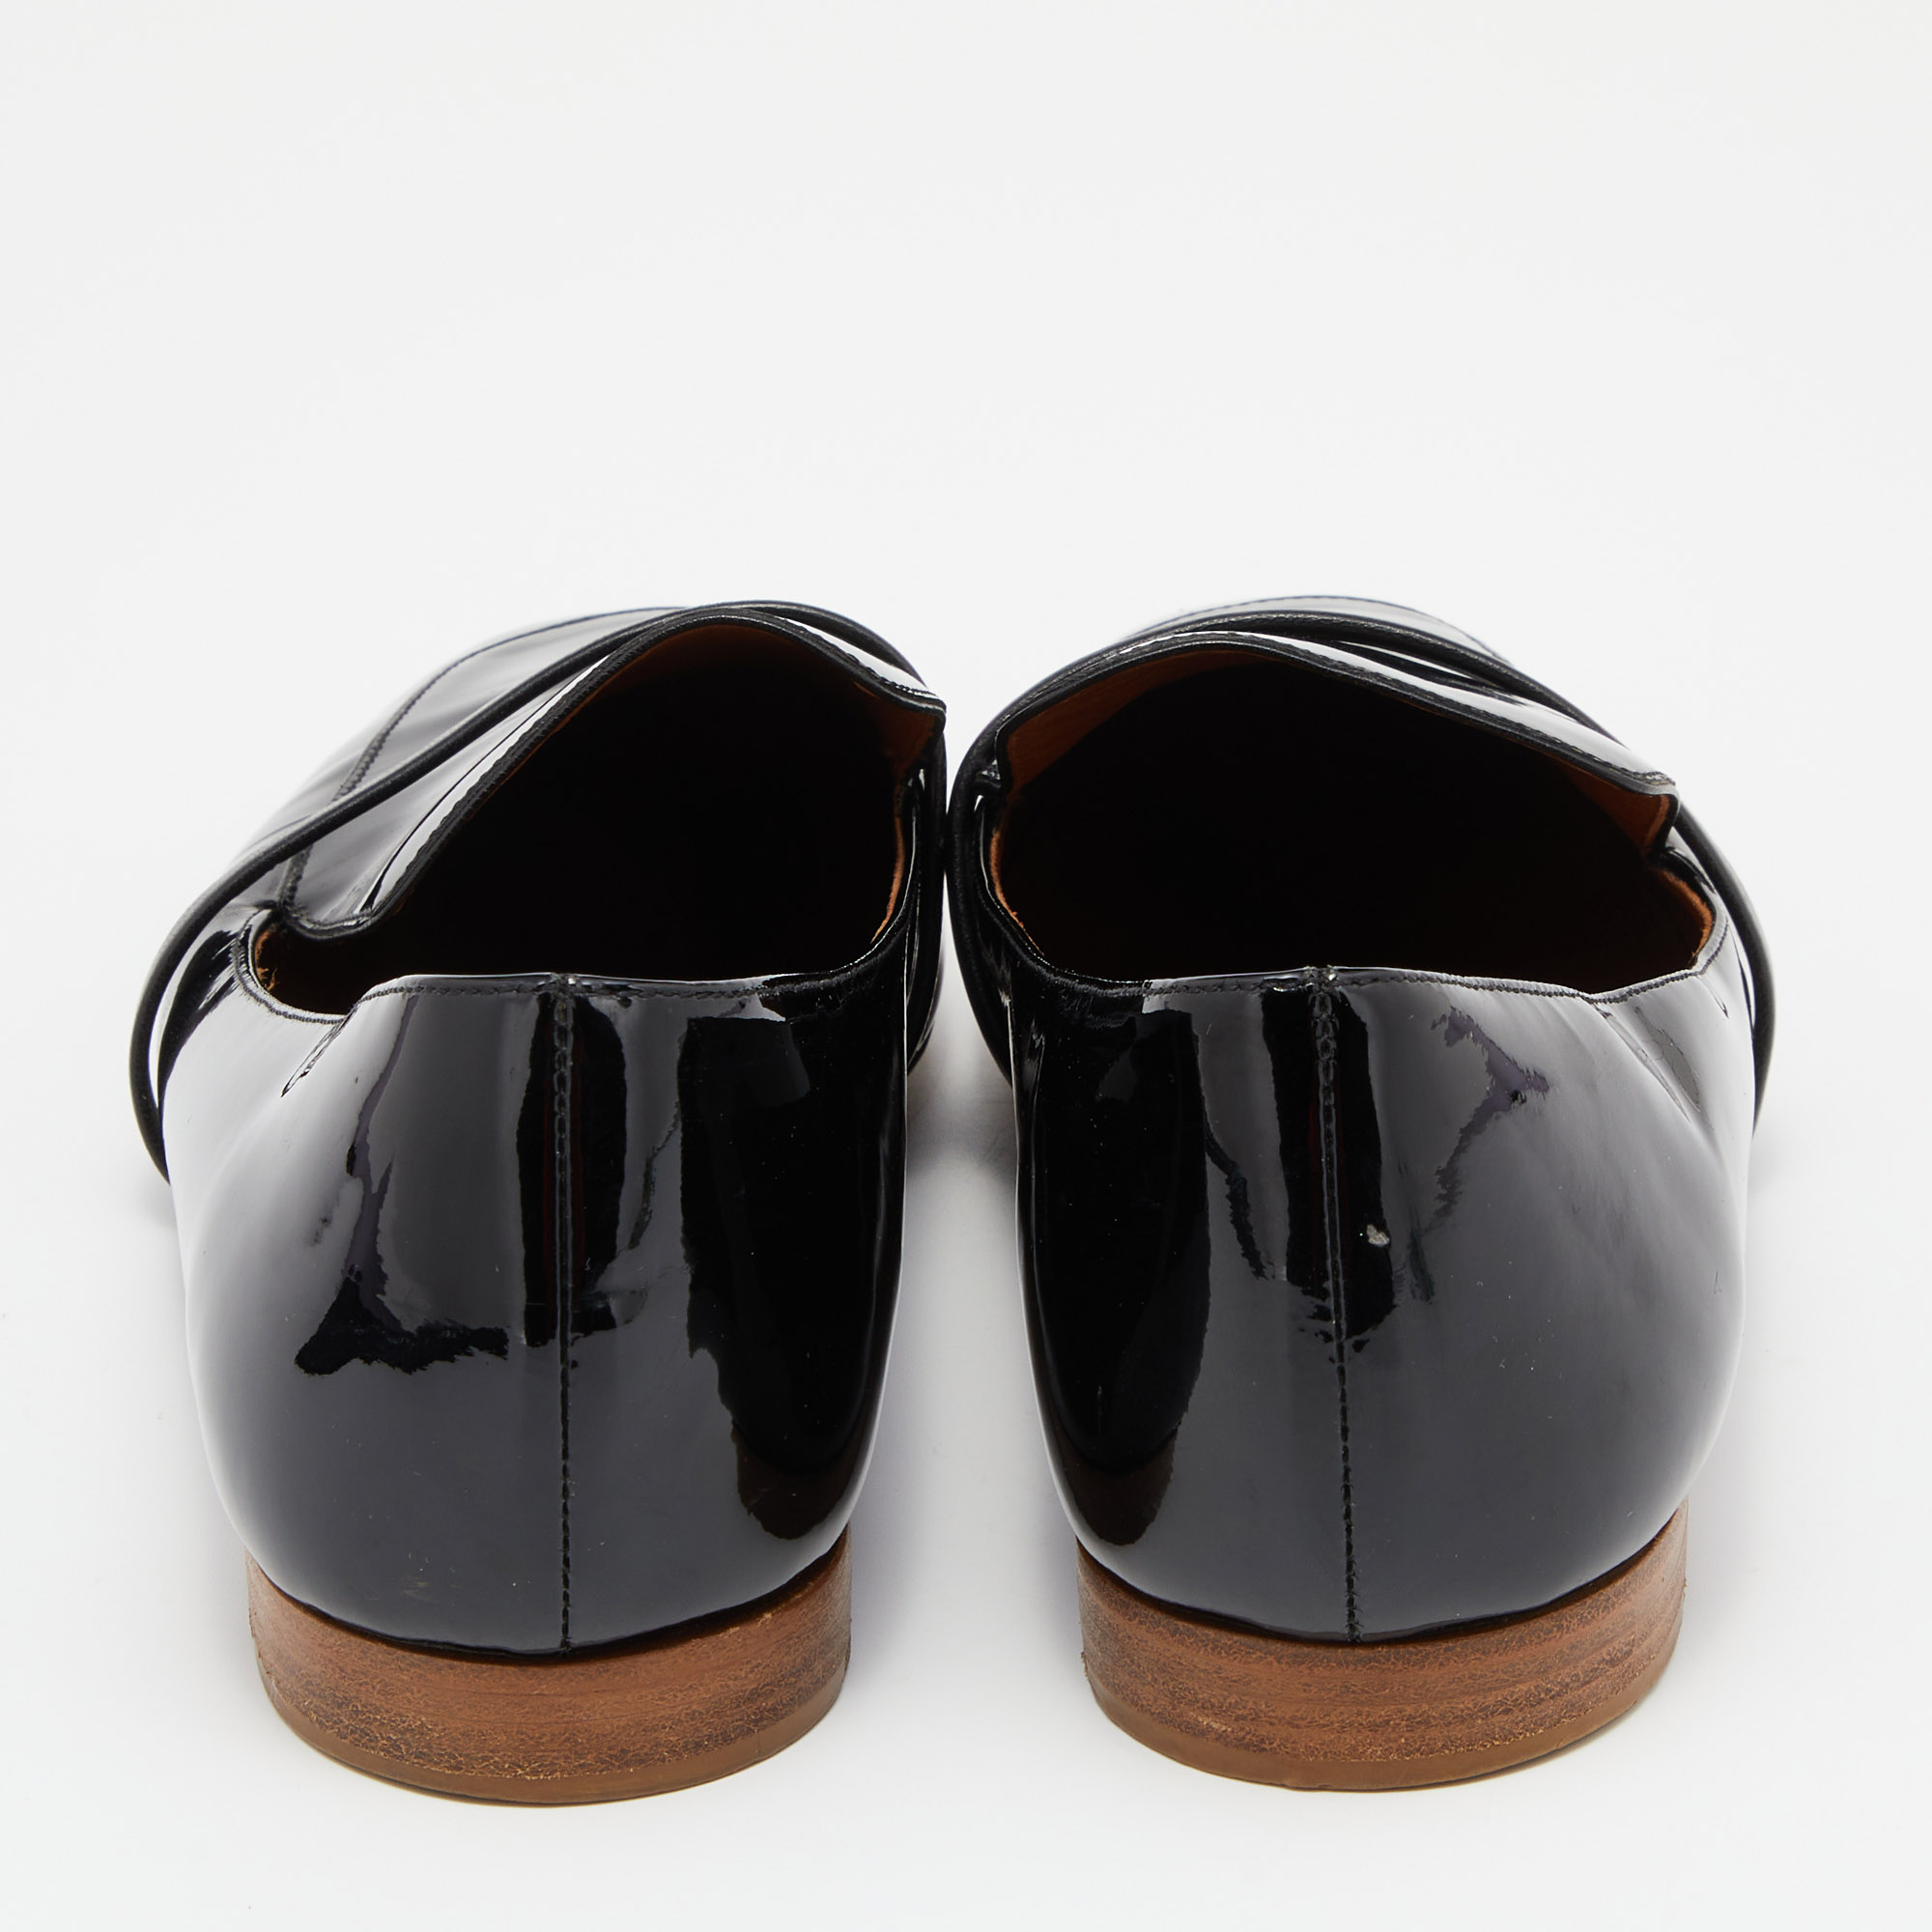 Malone Souliers Black Patent Leather Smoking Slippers Size 38